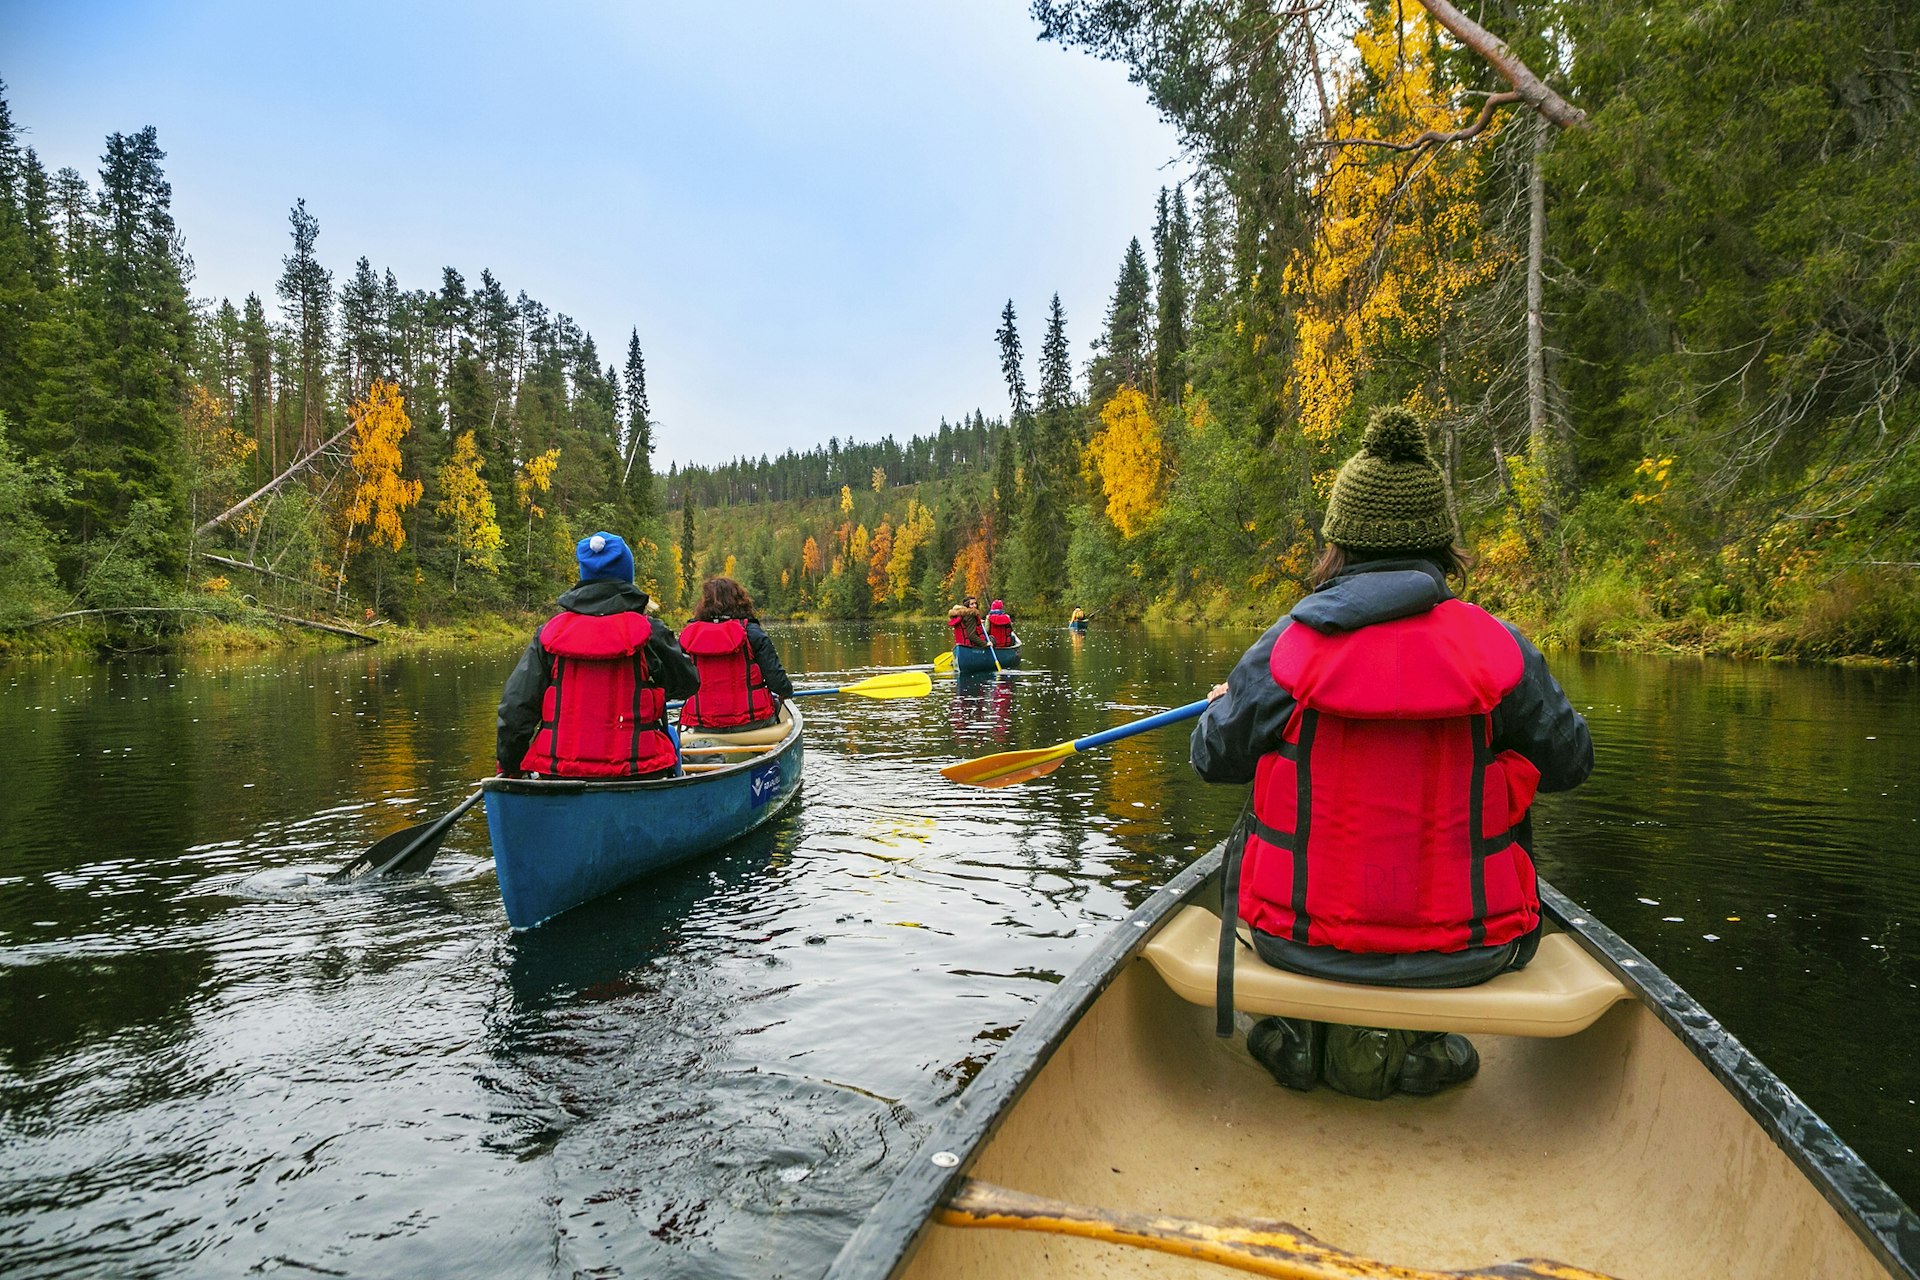 Several kayakers make their way through the water in Oulanka National Park in Finland